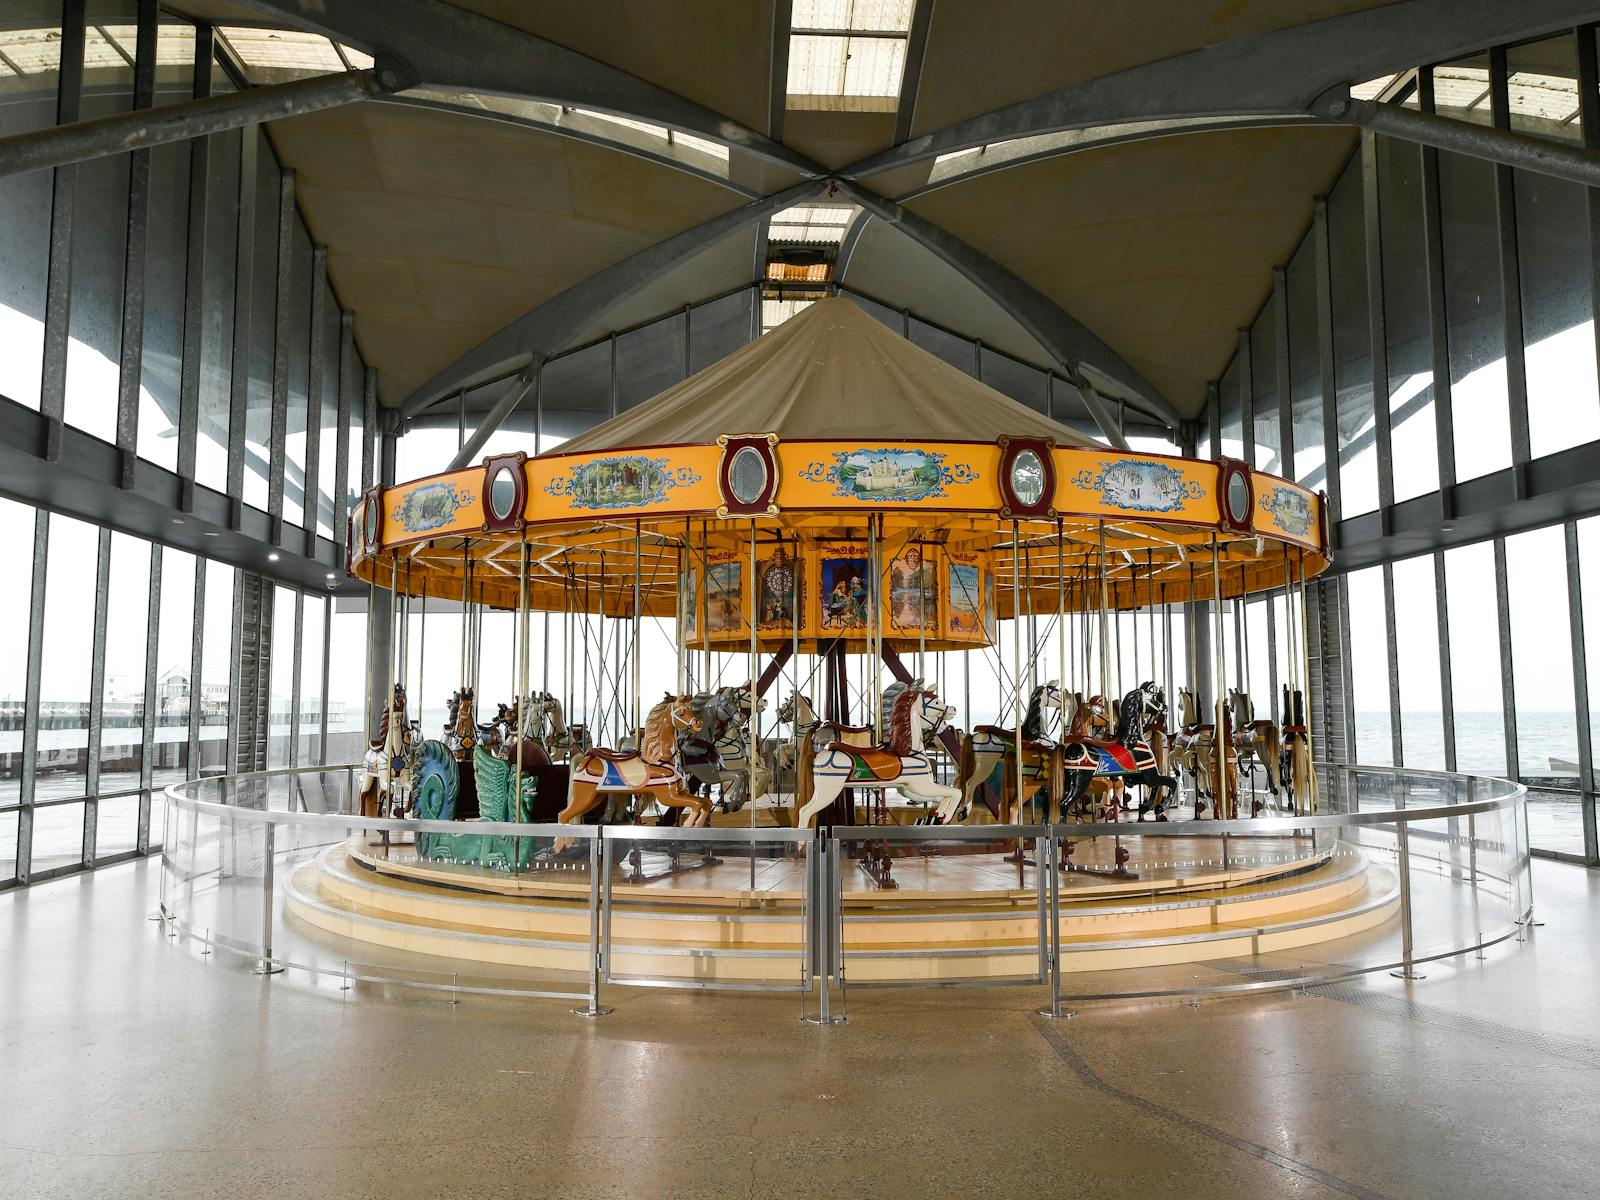 A photo of The Carousel with Corio Bay in the background through large glass windows